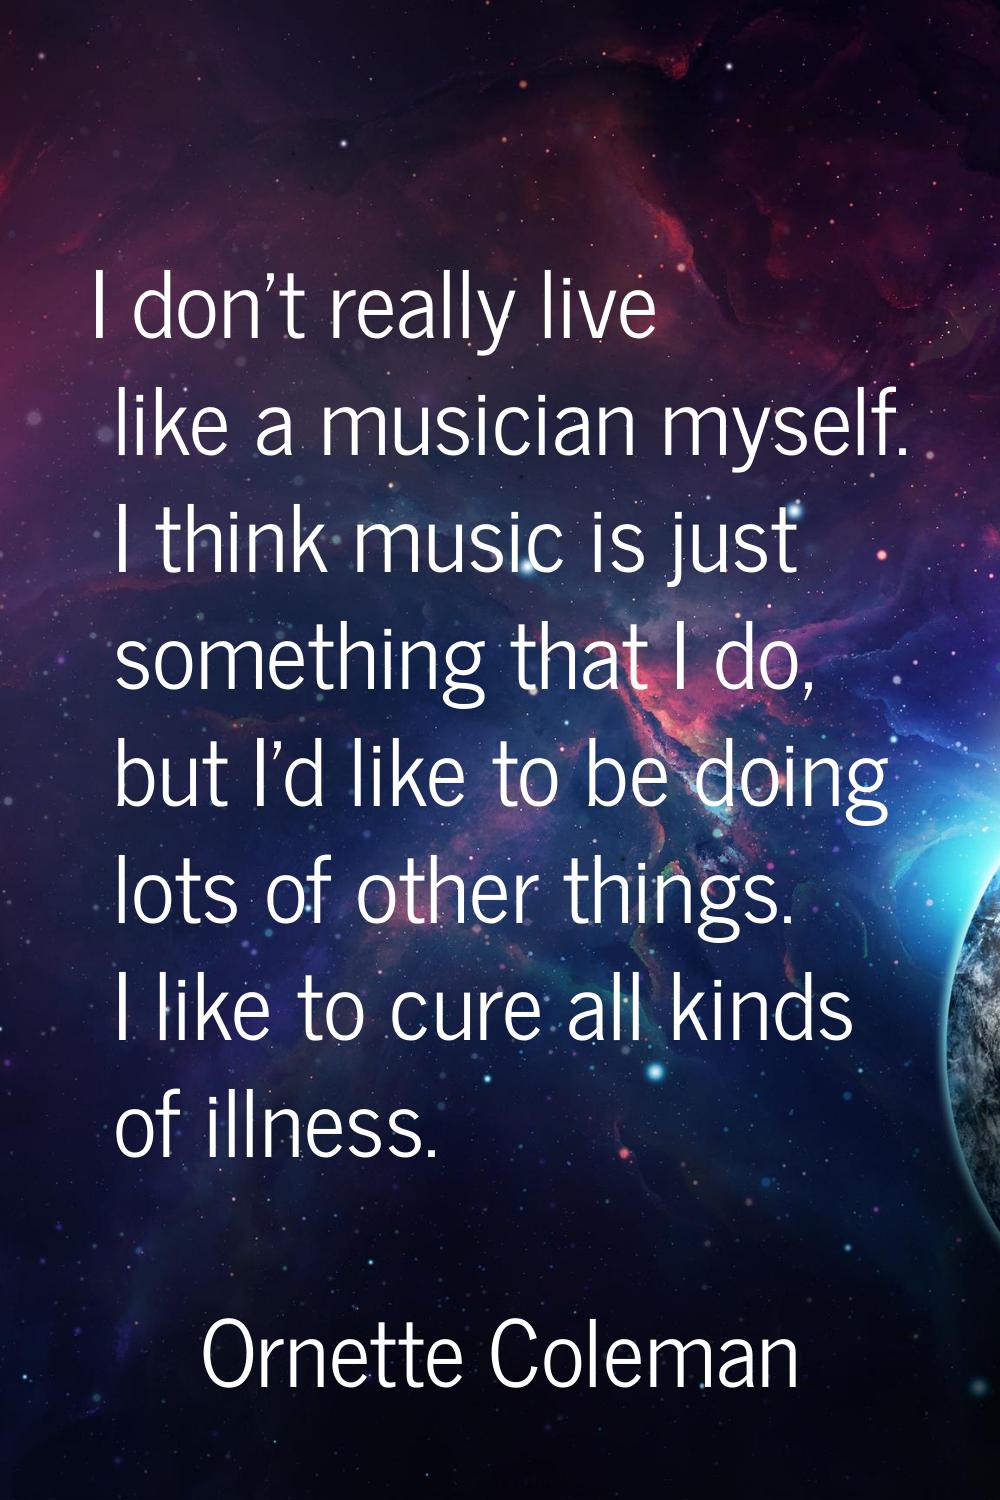 I don't really live like a musician myself. I think music is just something that I do, but I'd like